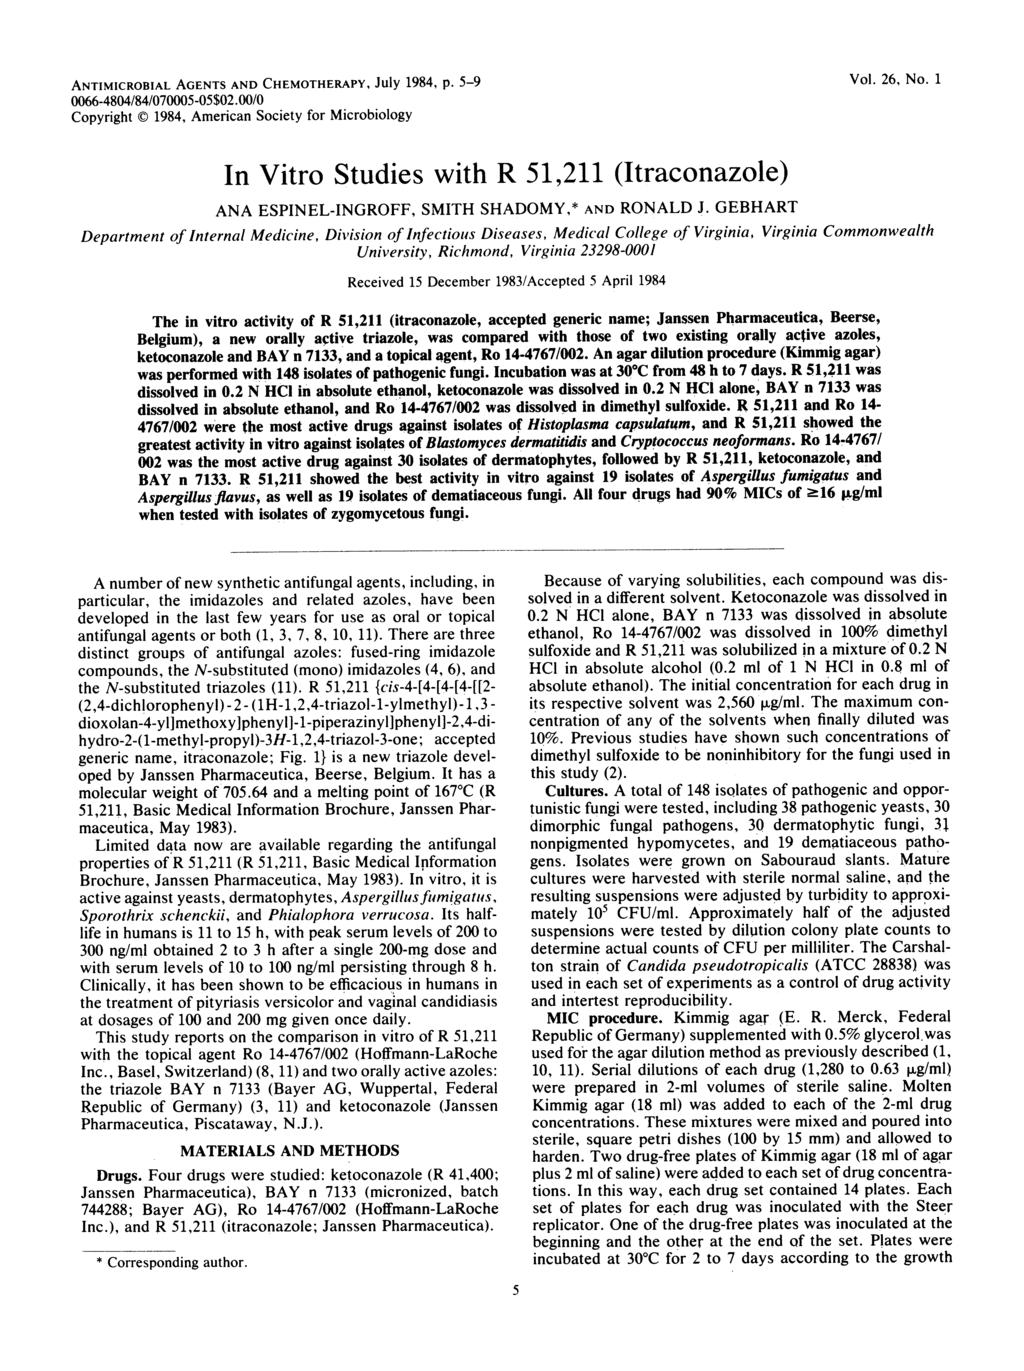 ANTIMICROBIAL AGENTS AND CHEMOTHERAPY, JUIY 1984, p. 5-9 Vol. 26, No. 1 0066-4804/84/070005-05$02.